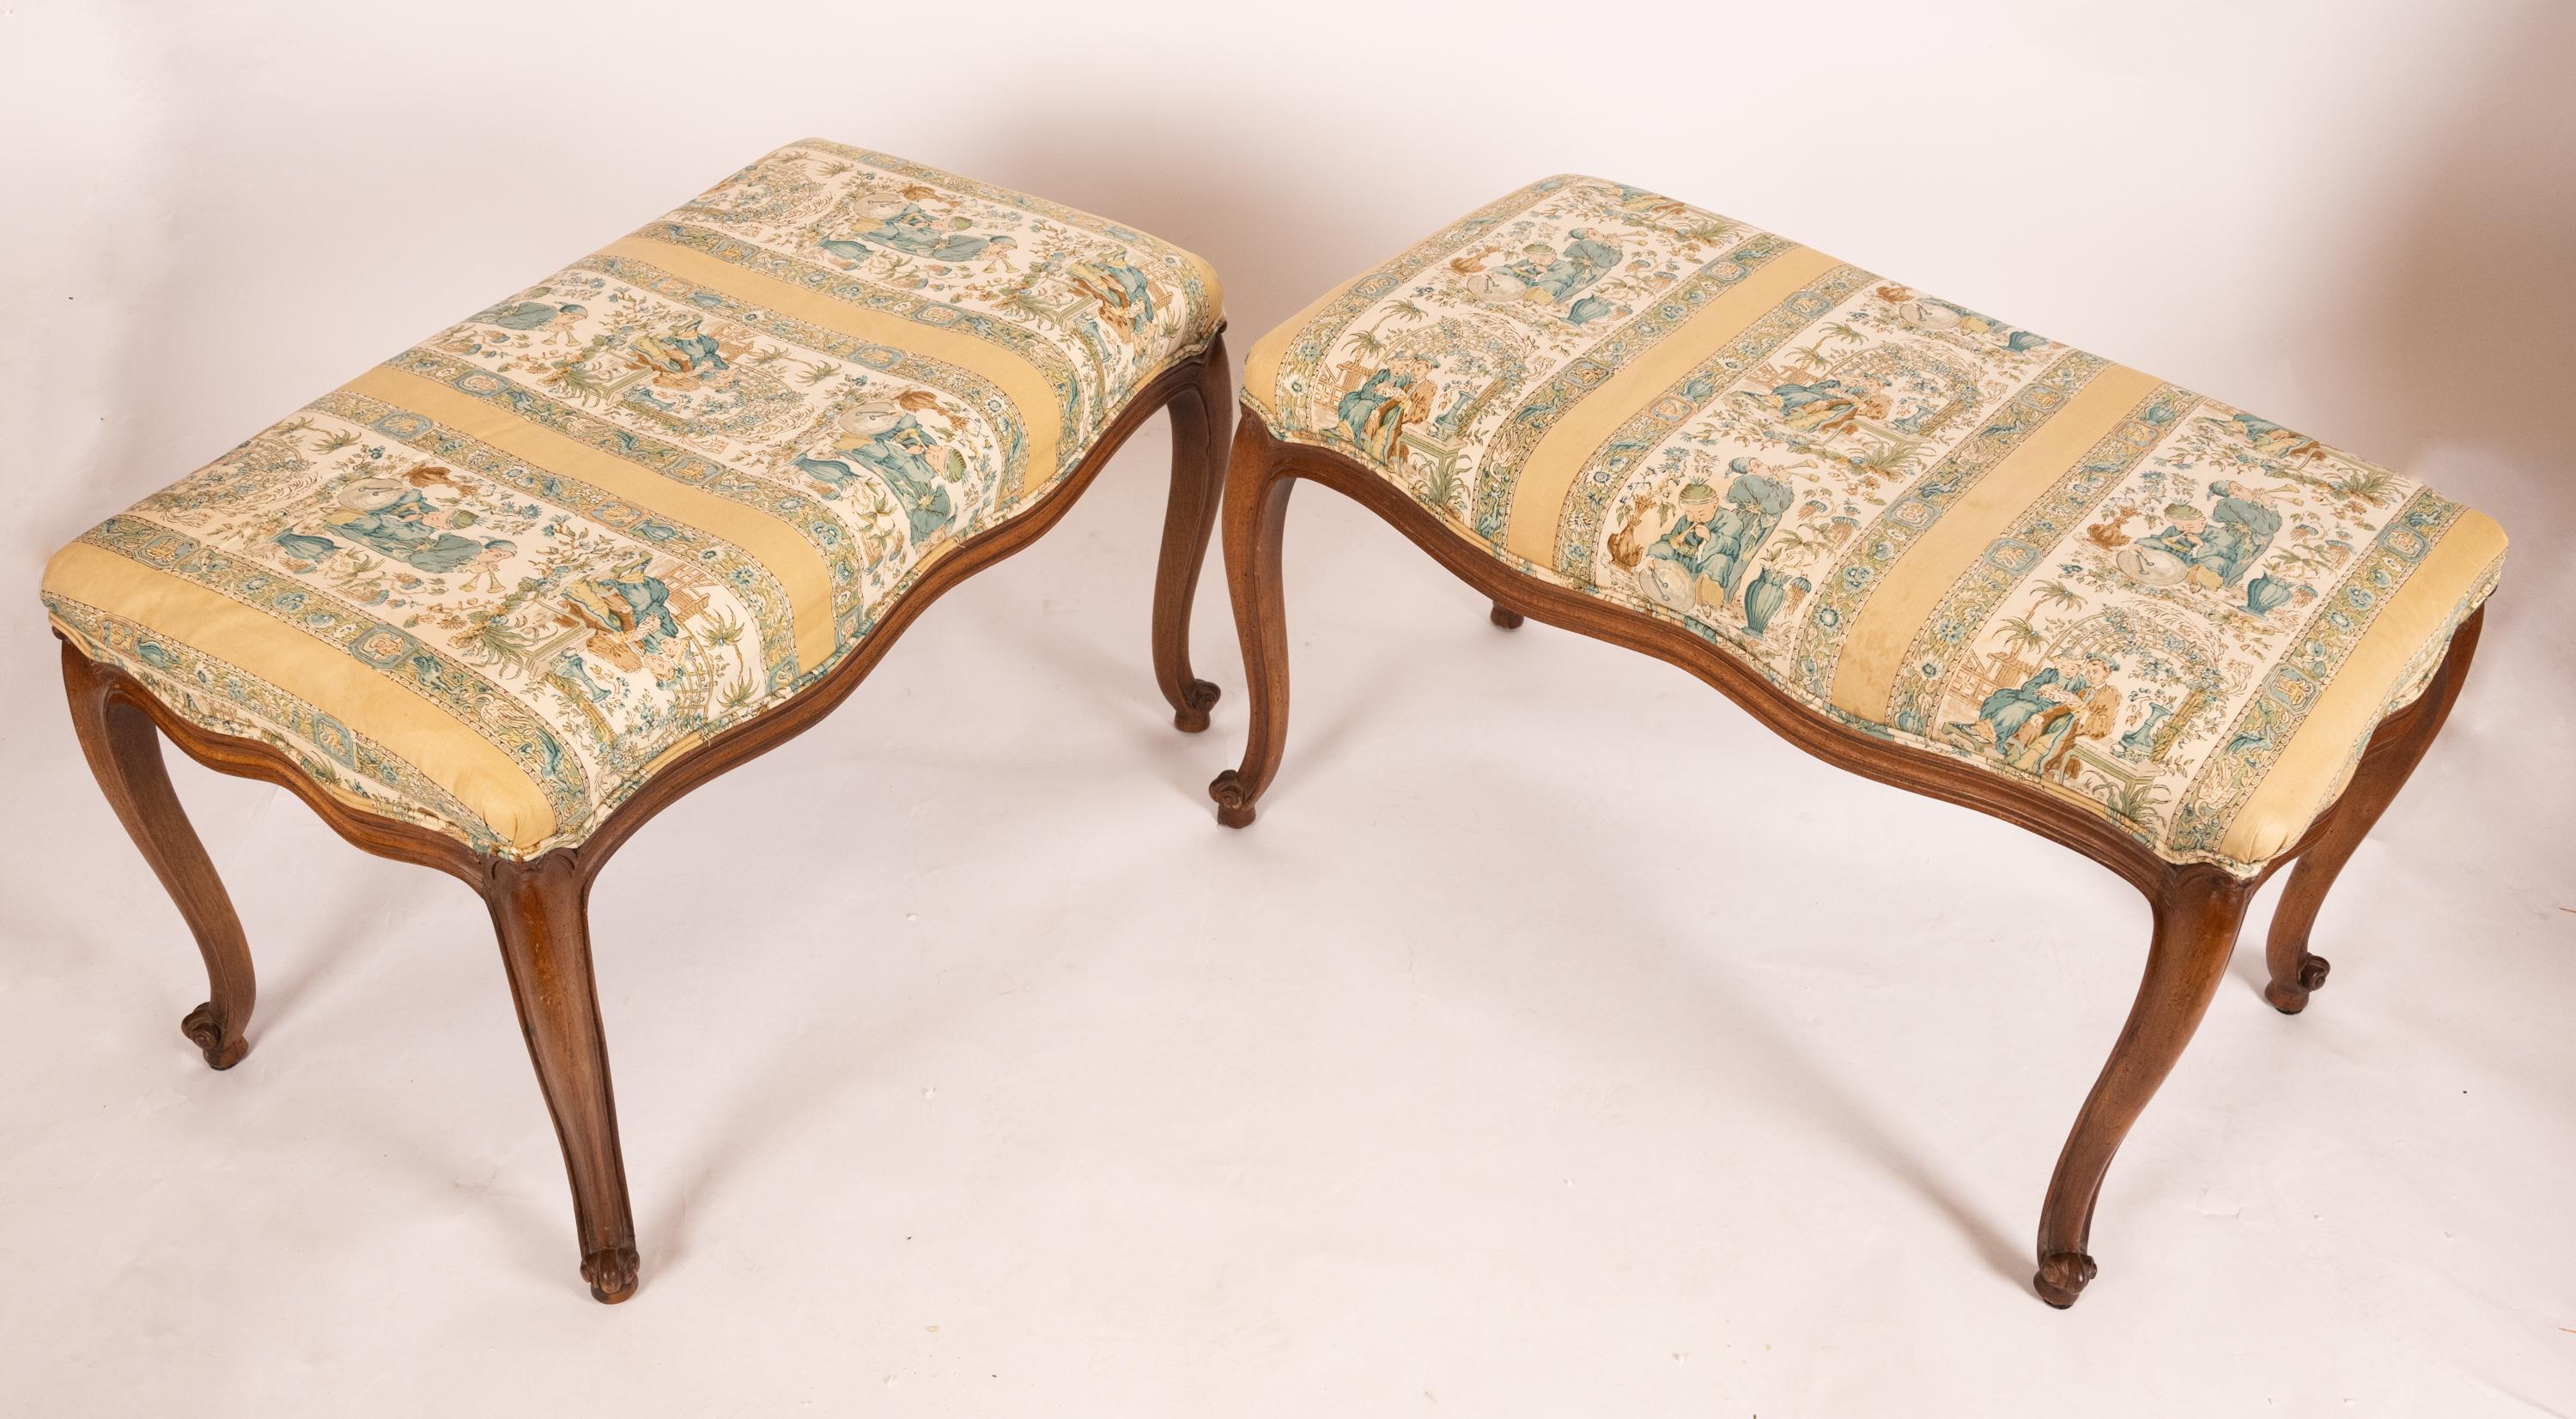 Louis XIV Pair of 19th Century Louis XVth-Style Fruitwood Benches with Upholstered Seats For Sale